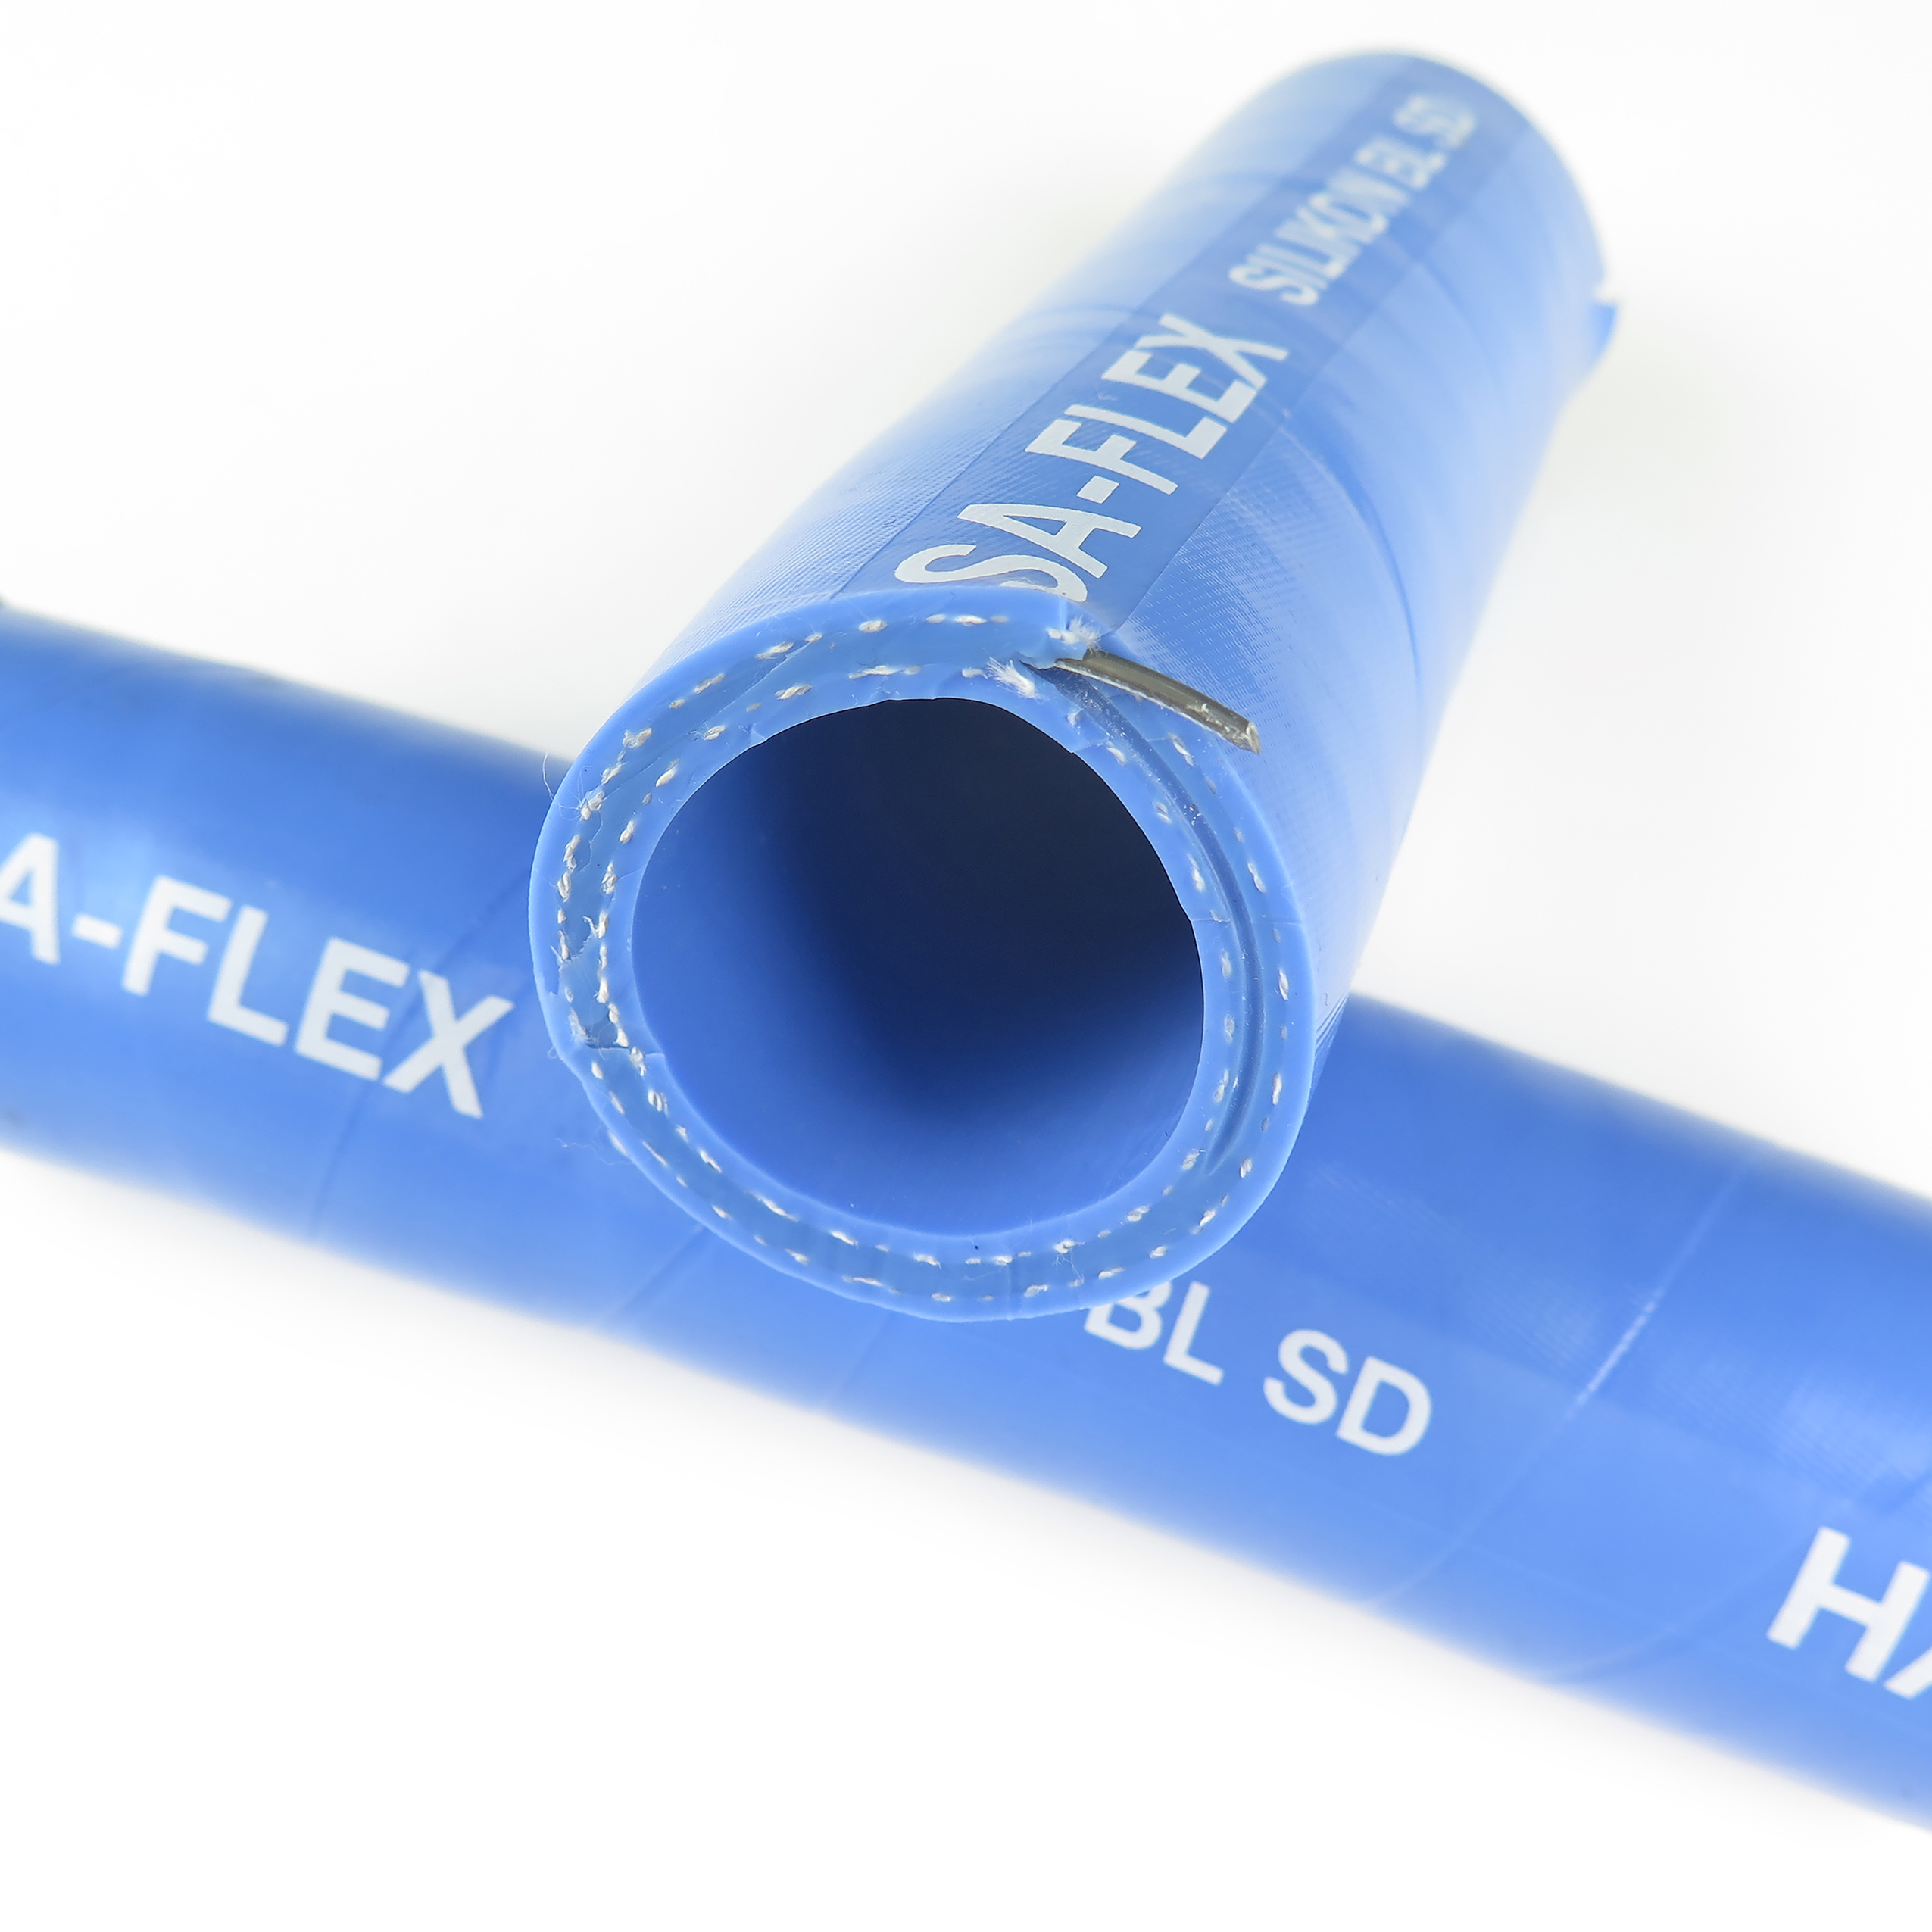 Silicone hose is upgraded, new products are constant